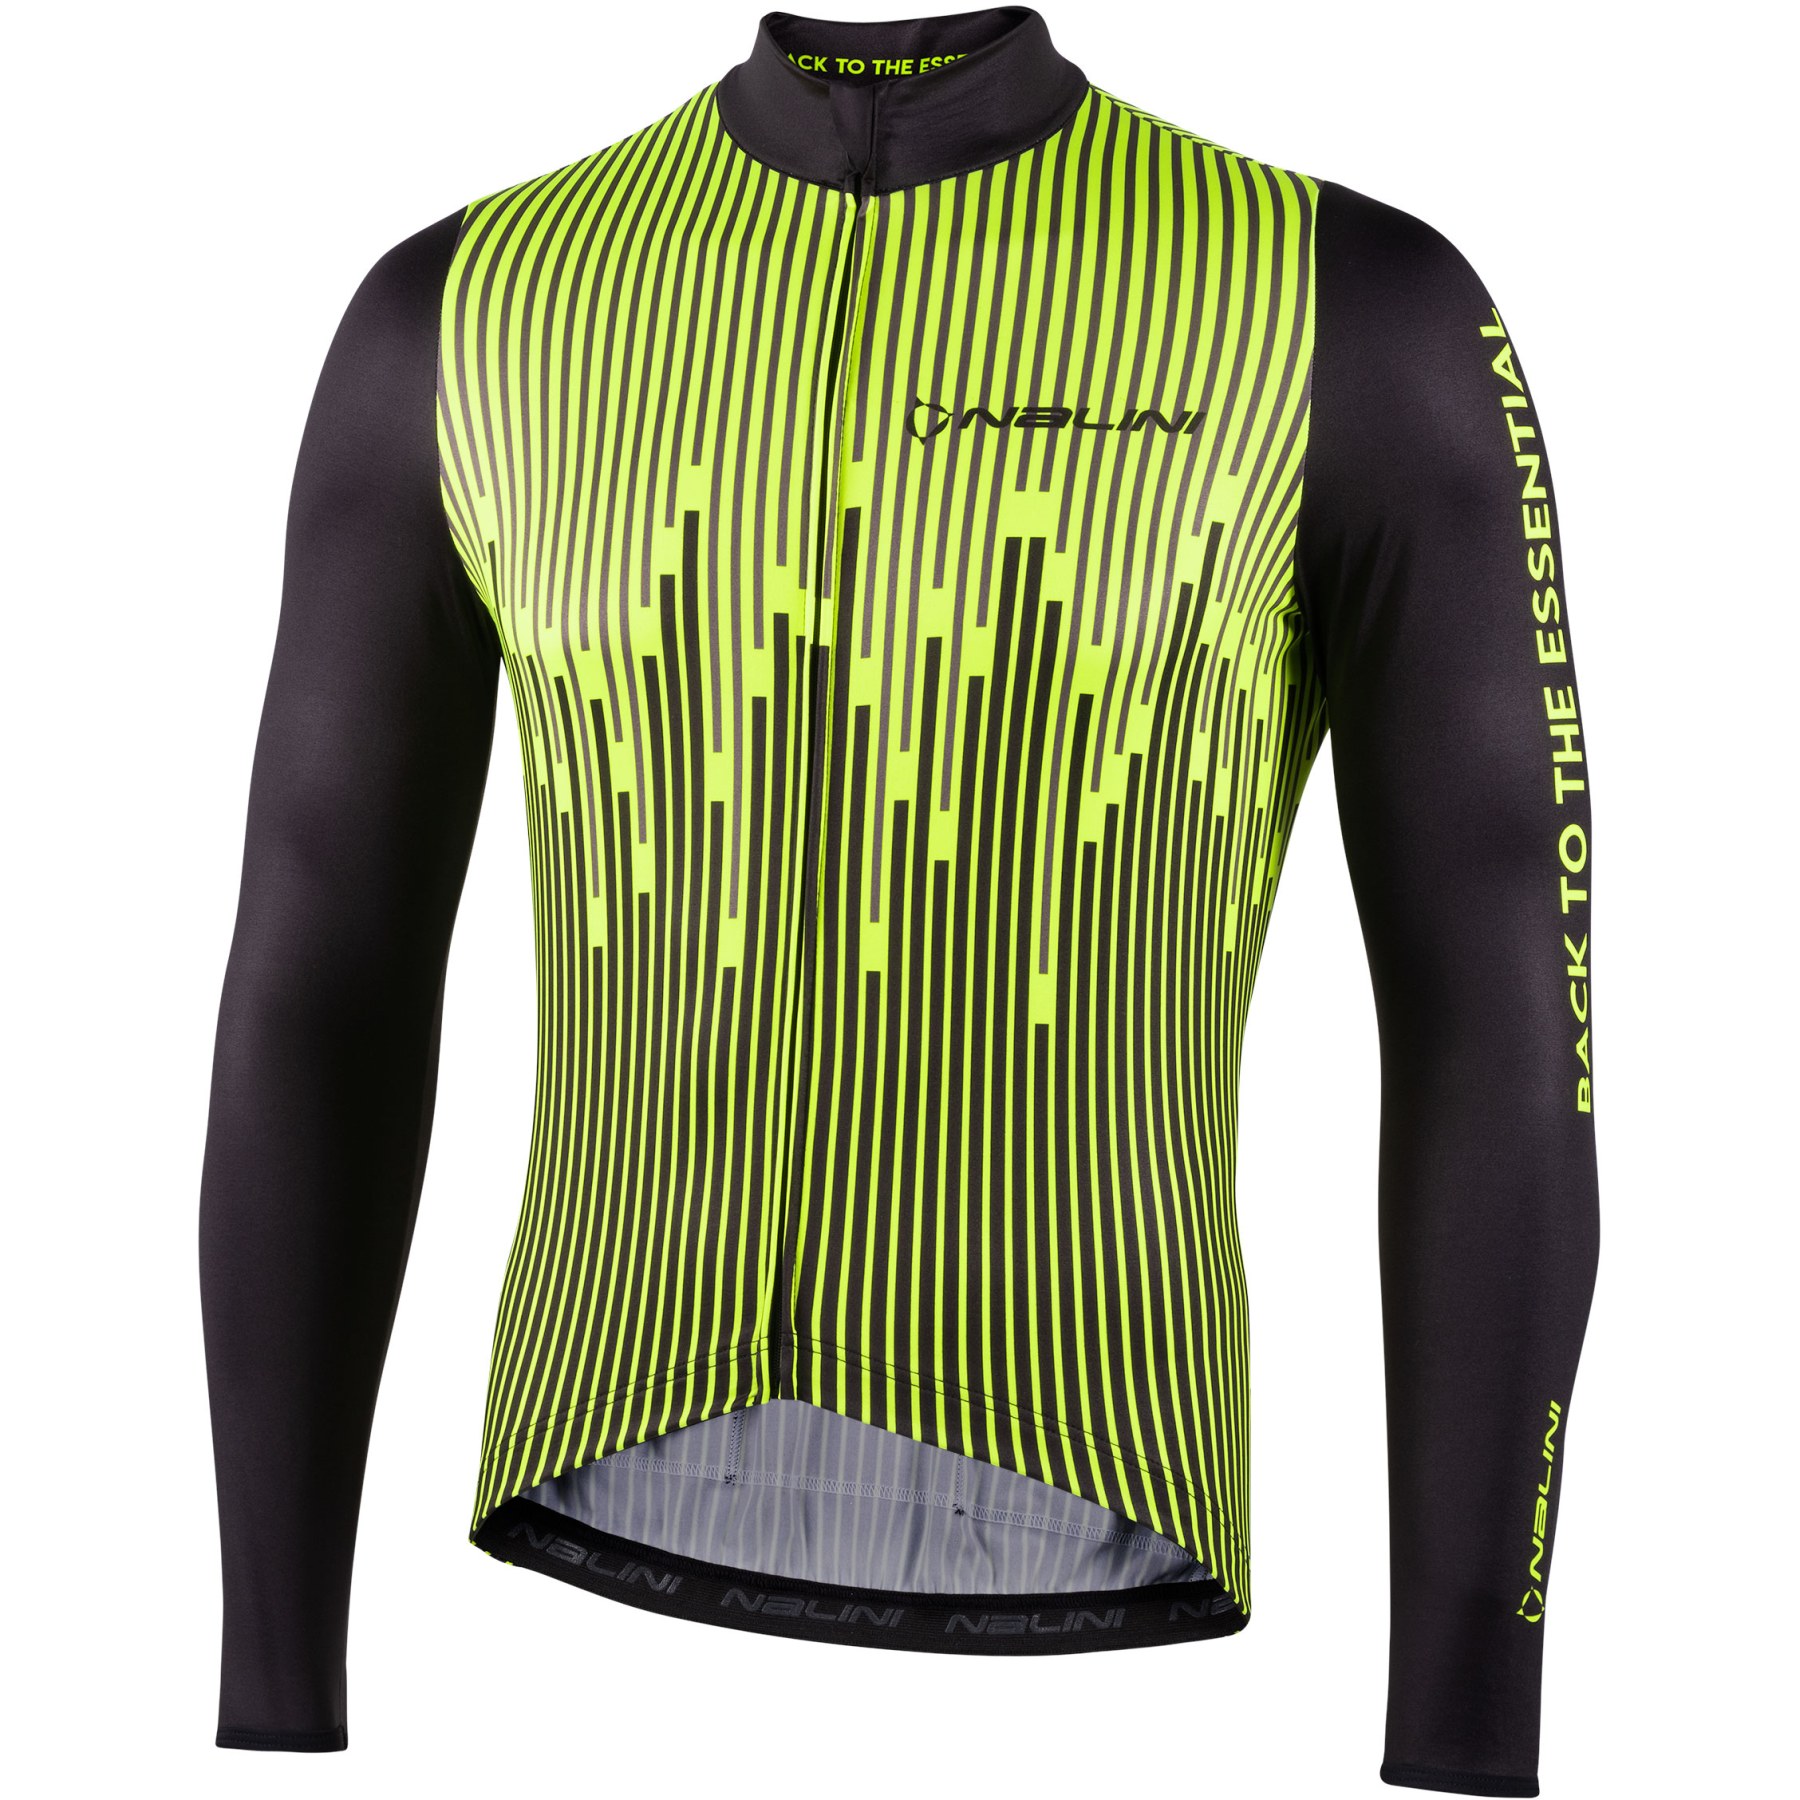 Image de Nalini New Fit Maillot Manches Longues - neon yellow/black 4050